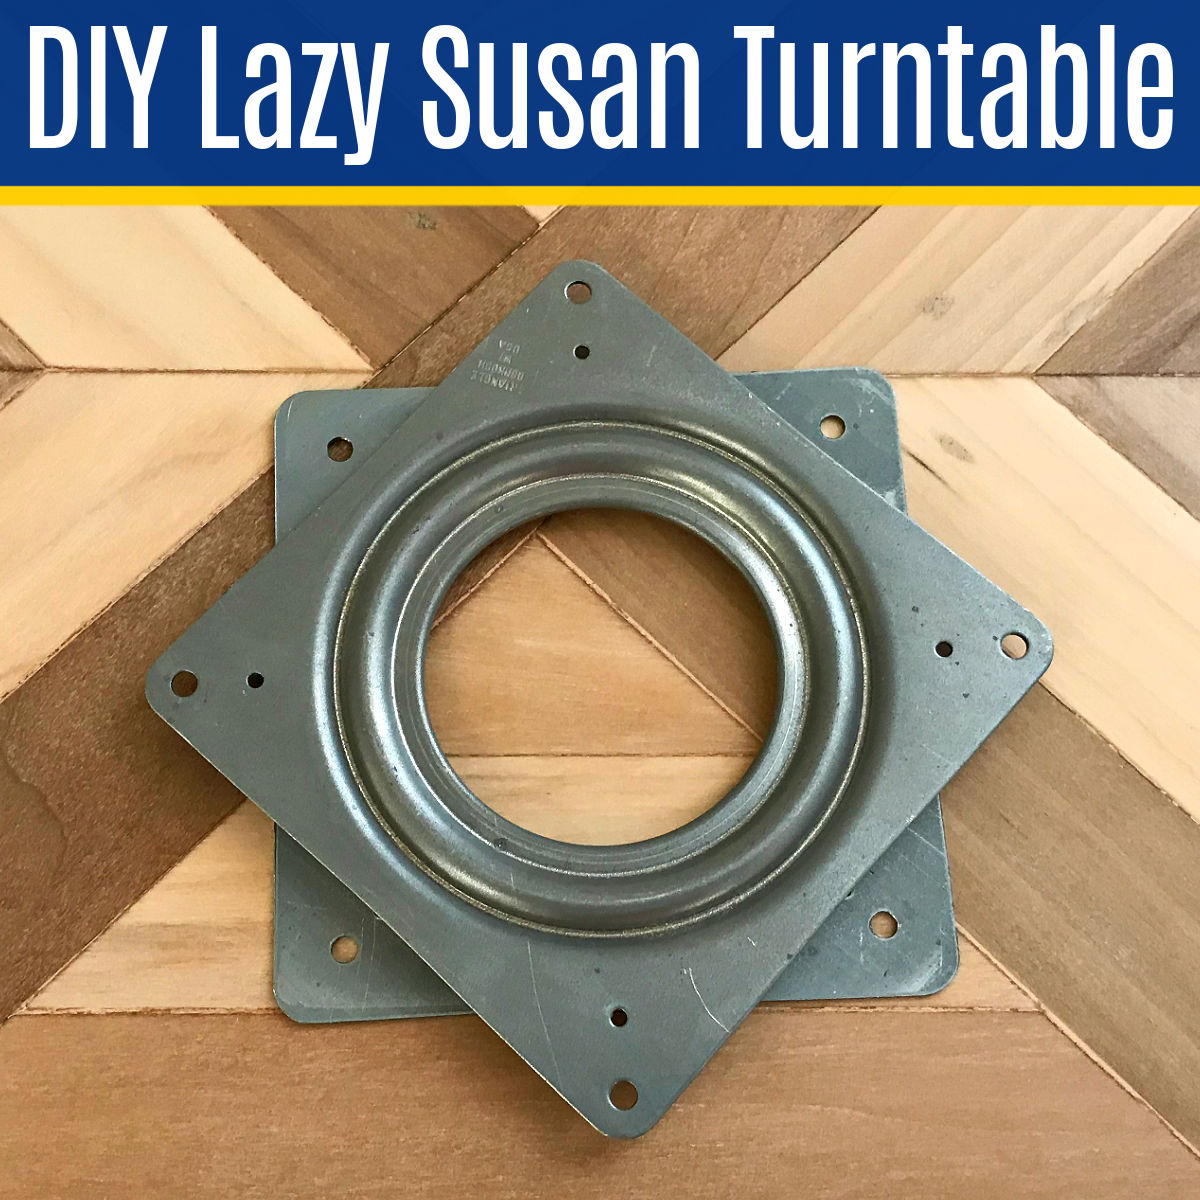 Scrollsaw Workshop: DIY Heavy Duty Motorized Turntable. Video details of  construction included.